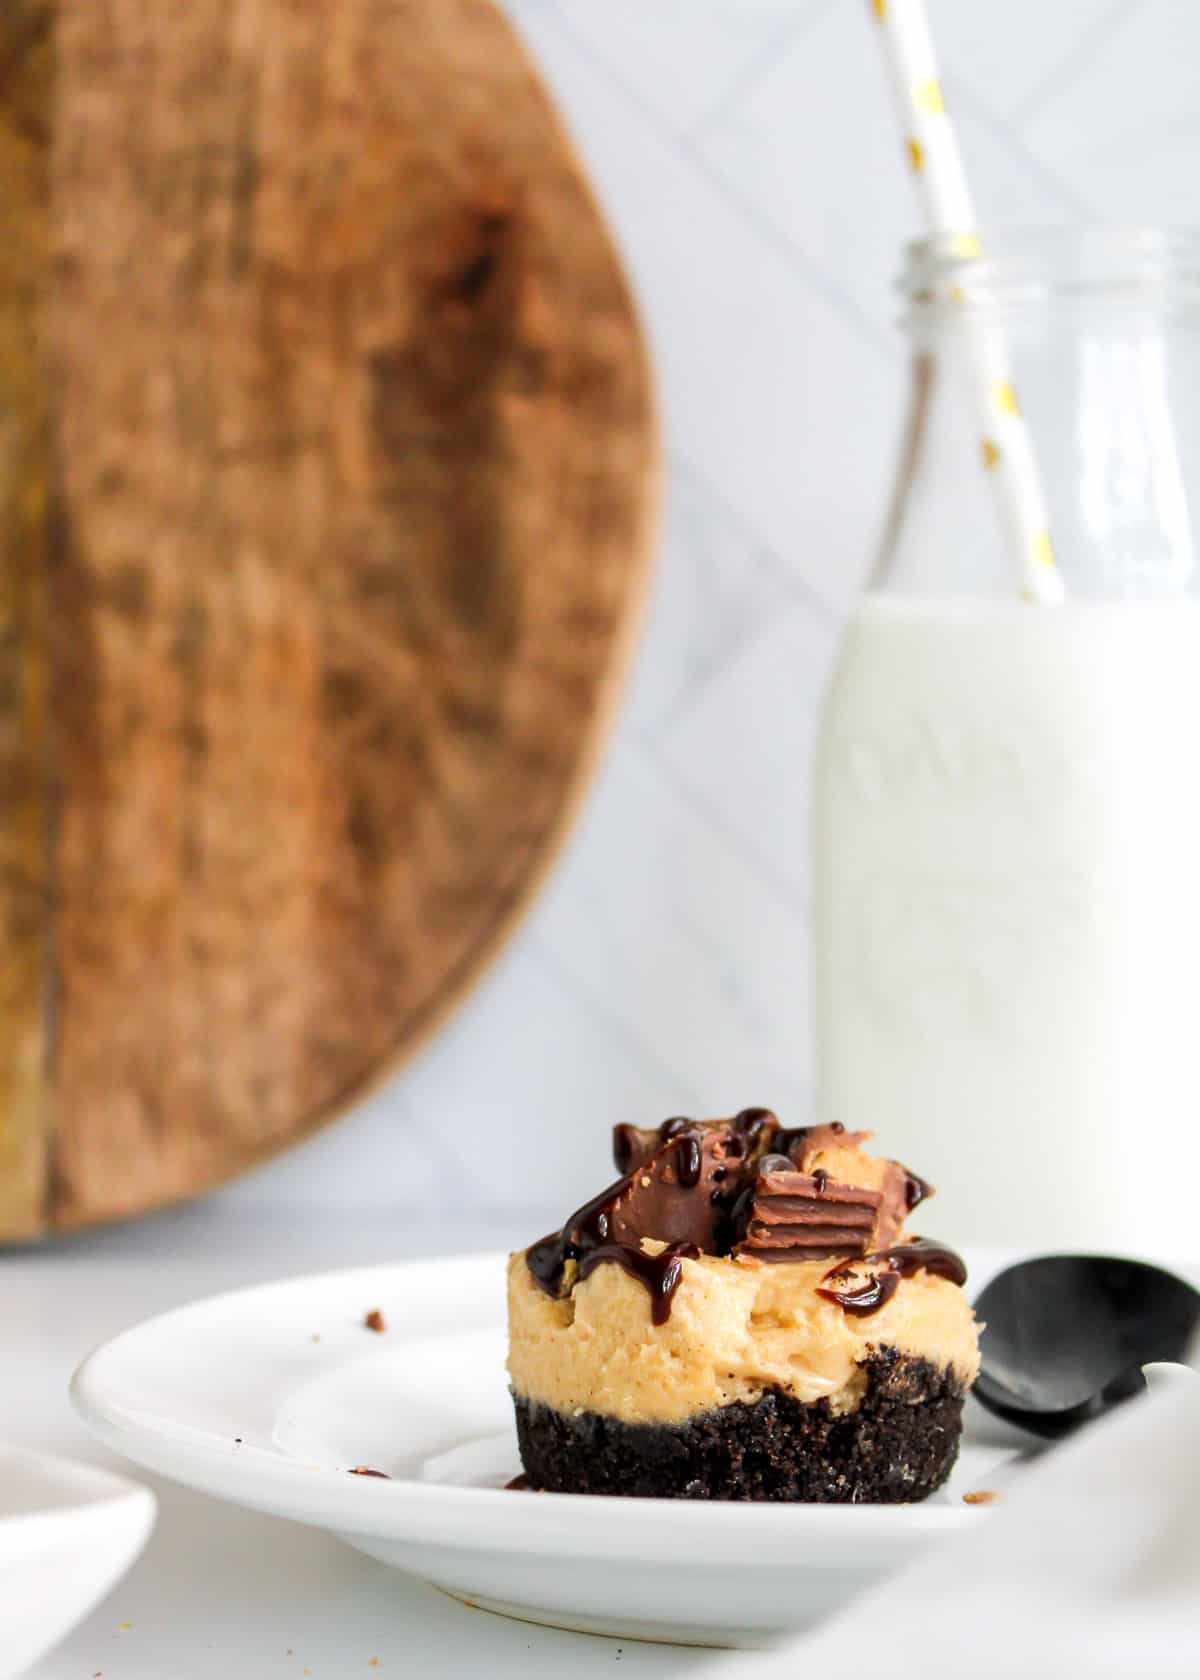 A mini peanut butter pie on a white plate with a bottle of milk and wood cutting board in the background.